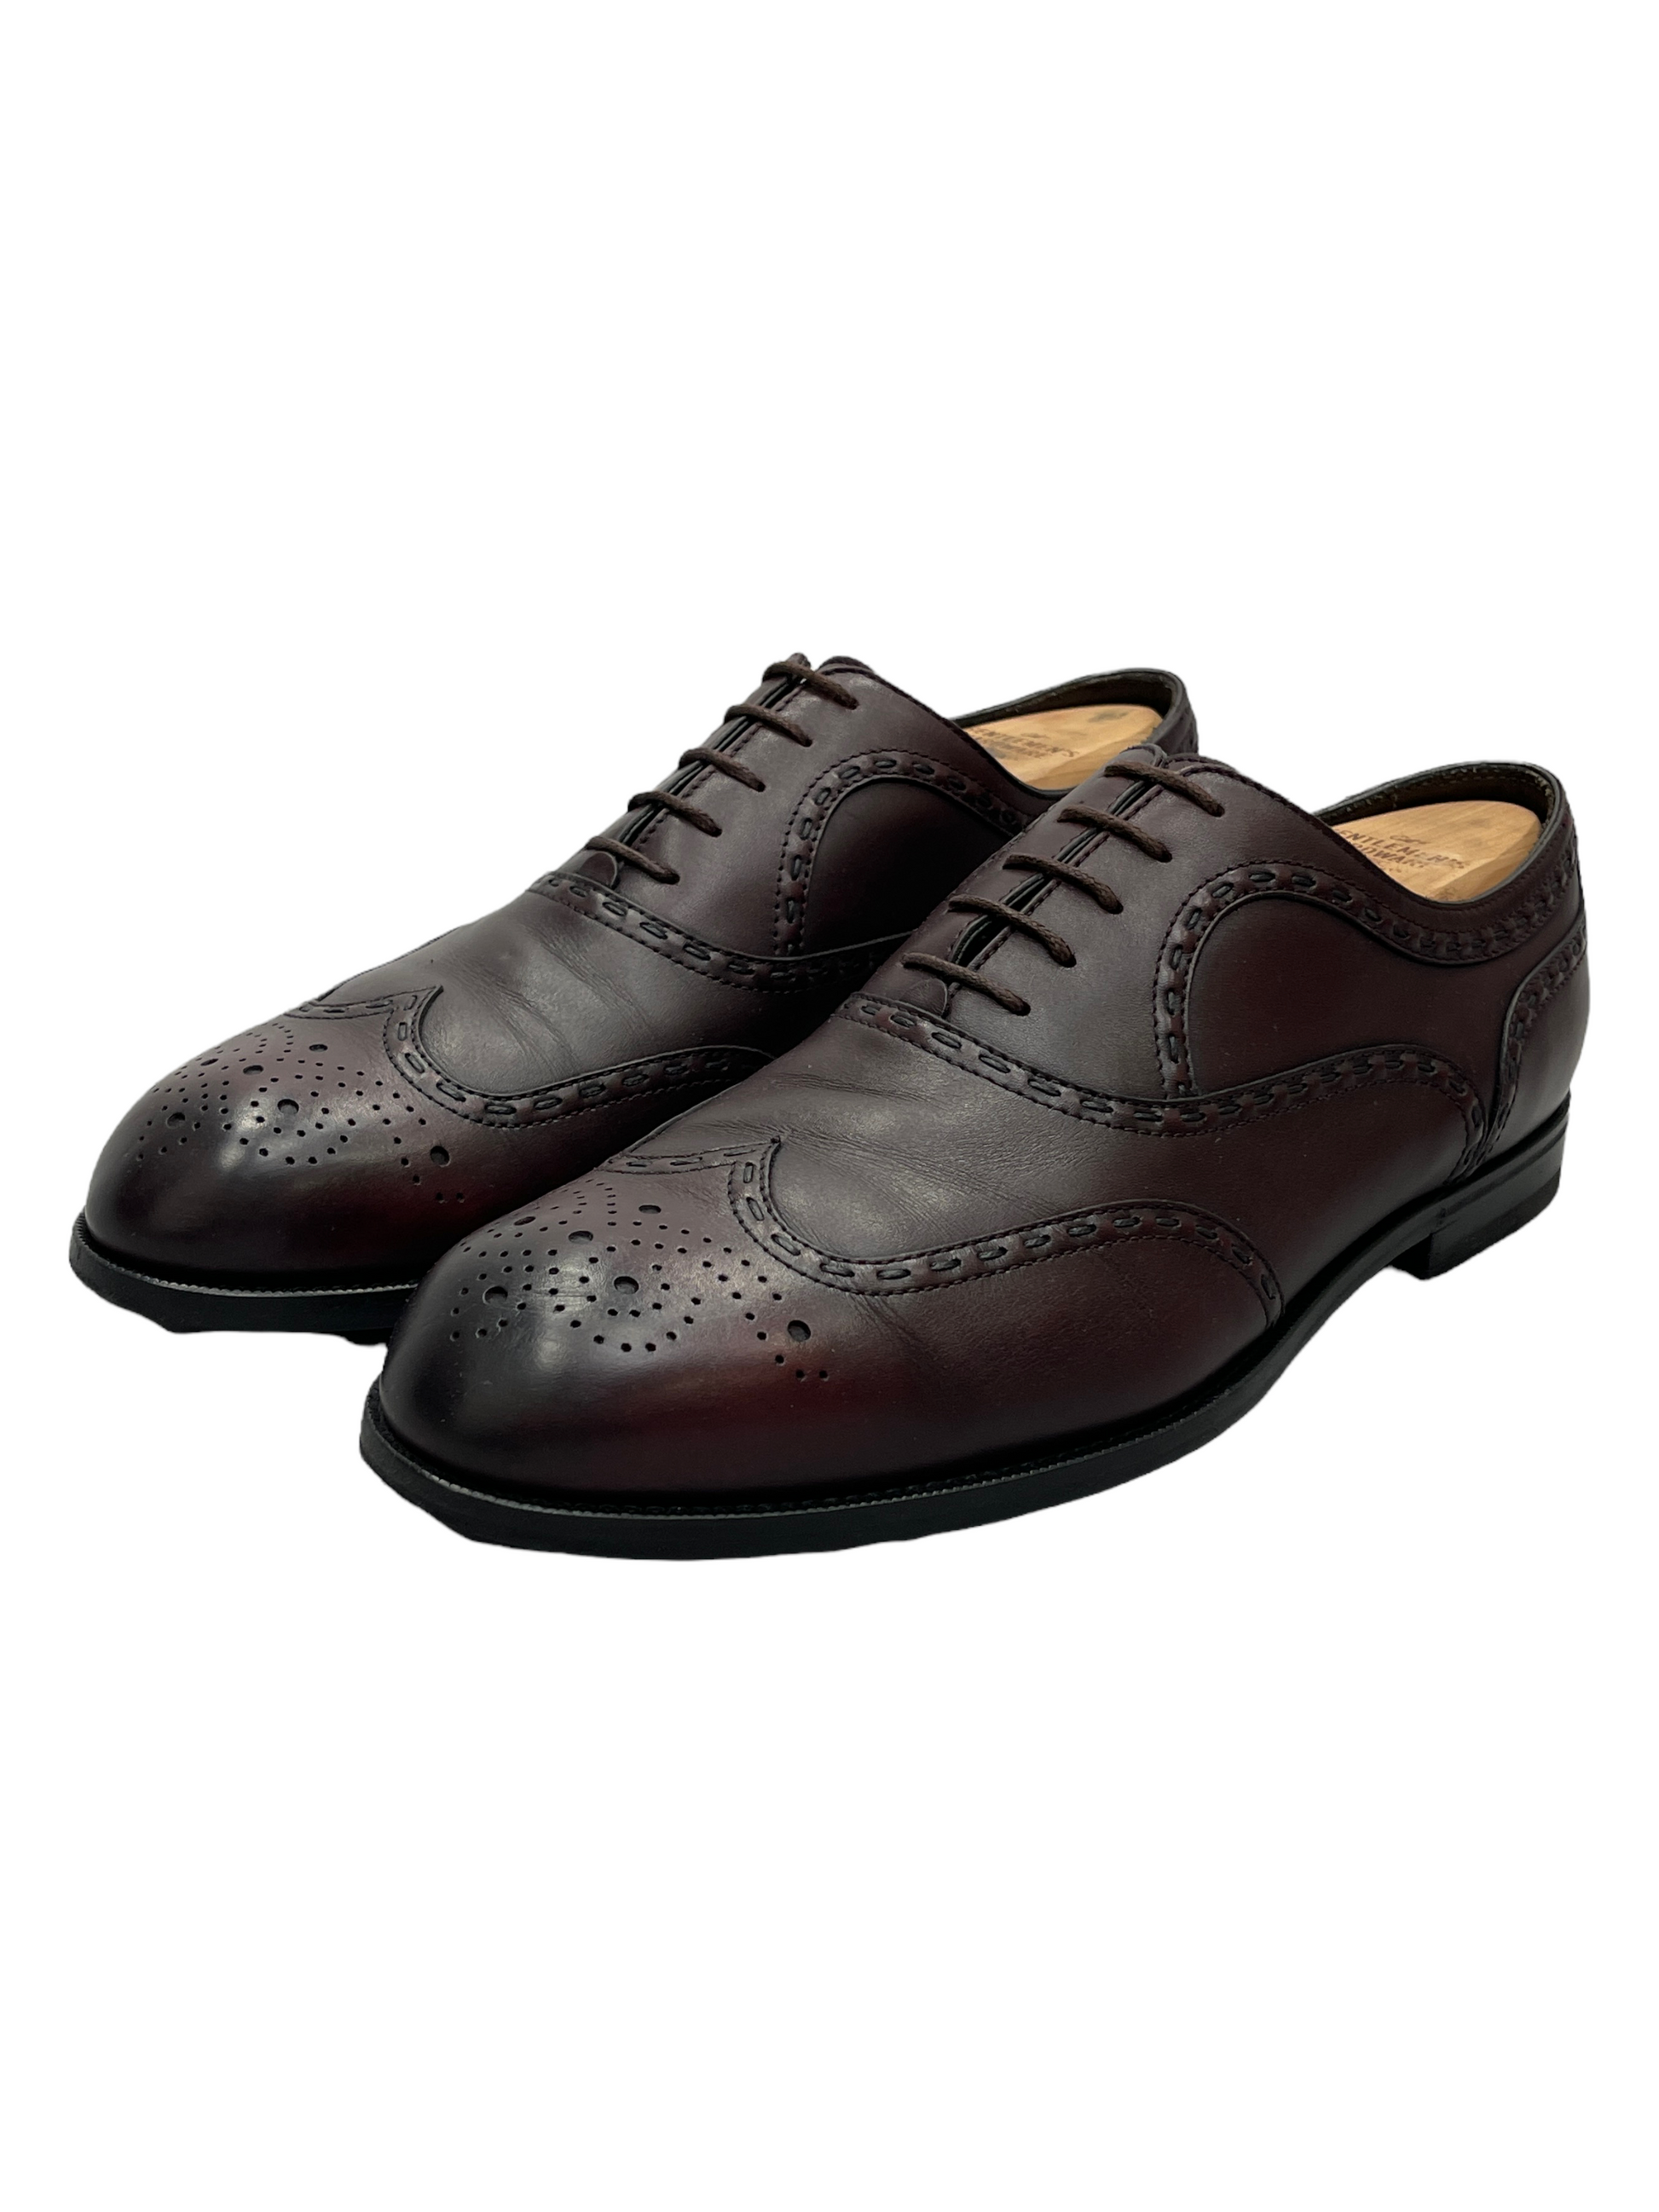 Bottega Veneta Burgundy Oxford Brogue Dress Shoes 8 US - Genuine Design Luxury Consignment for Men. New & Pre-Owned Clothing, Shoes, & Accessories. Calgary, Canada